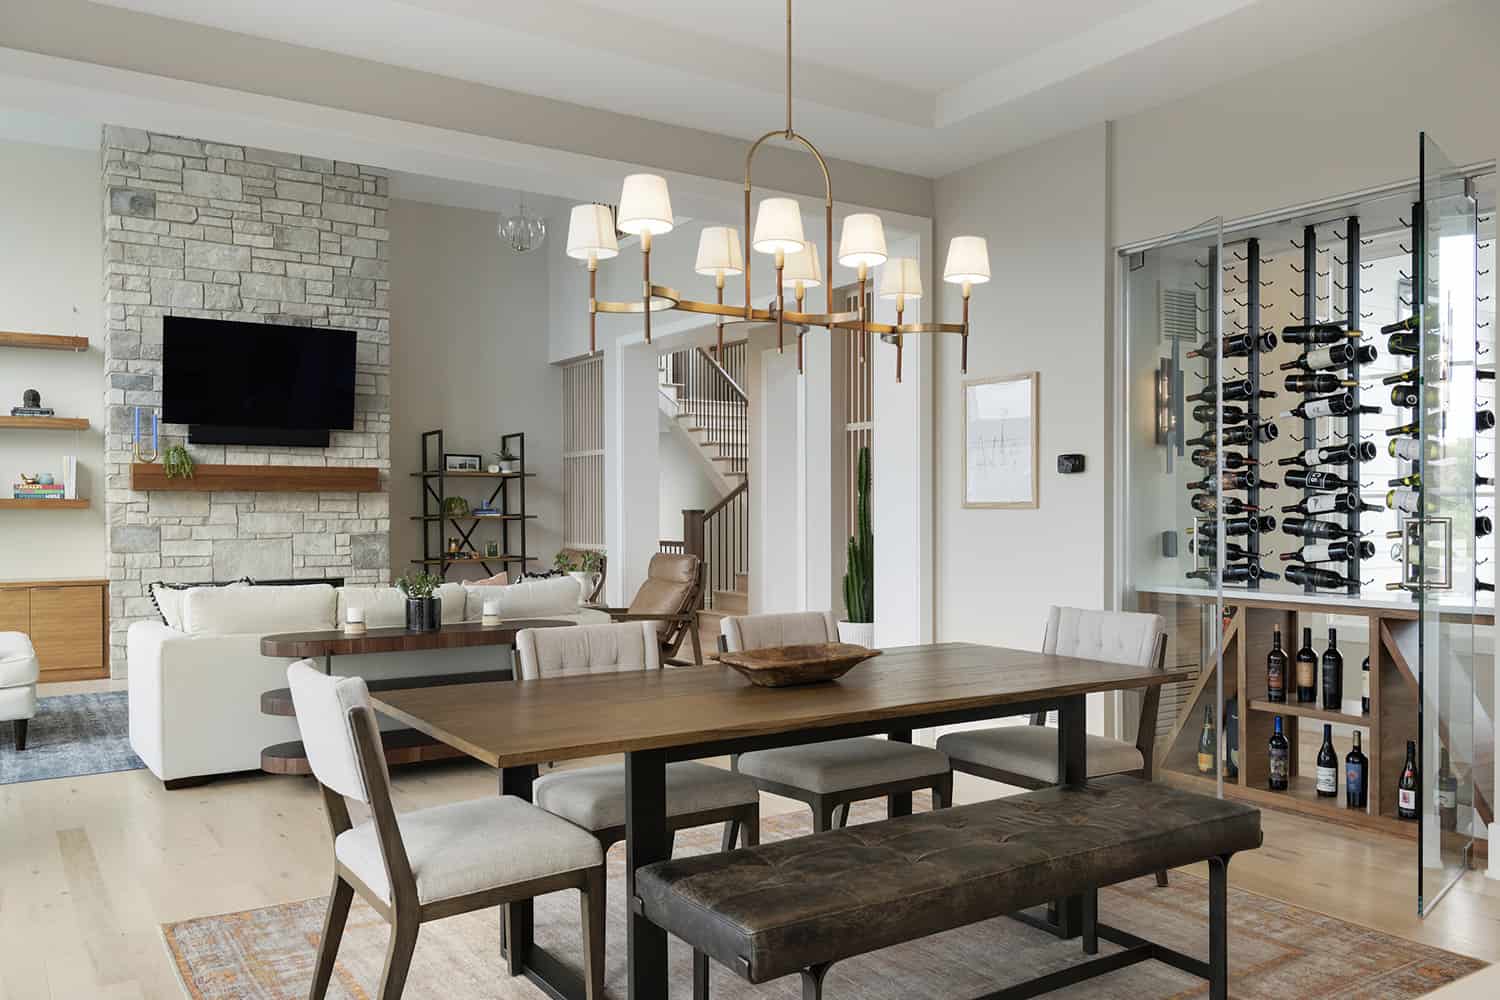  prairie-transitional-style-dining-room